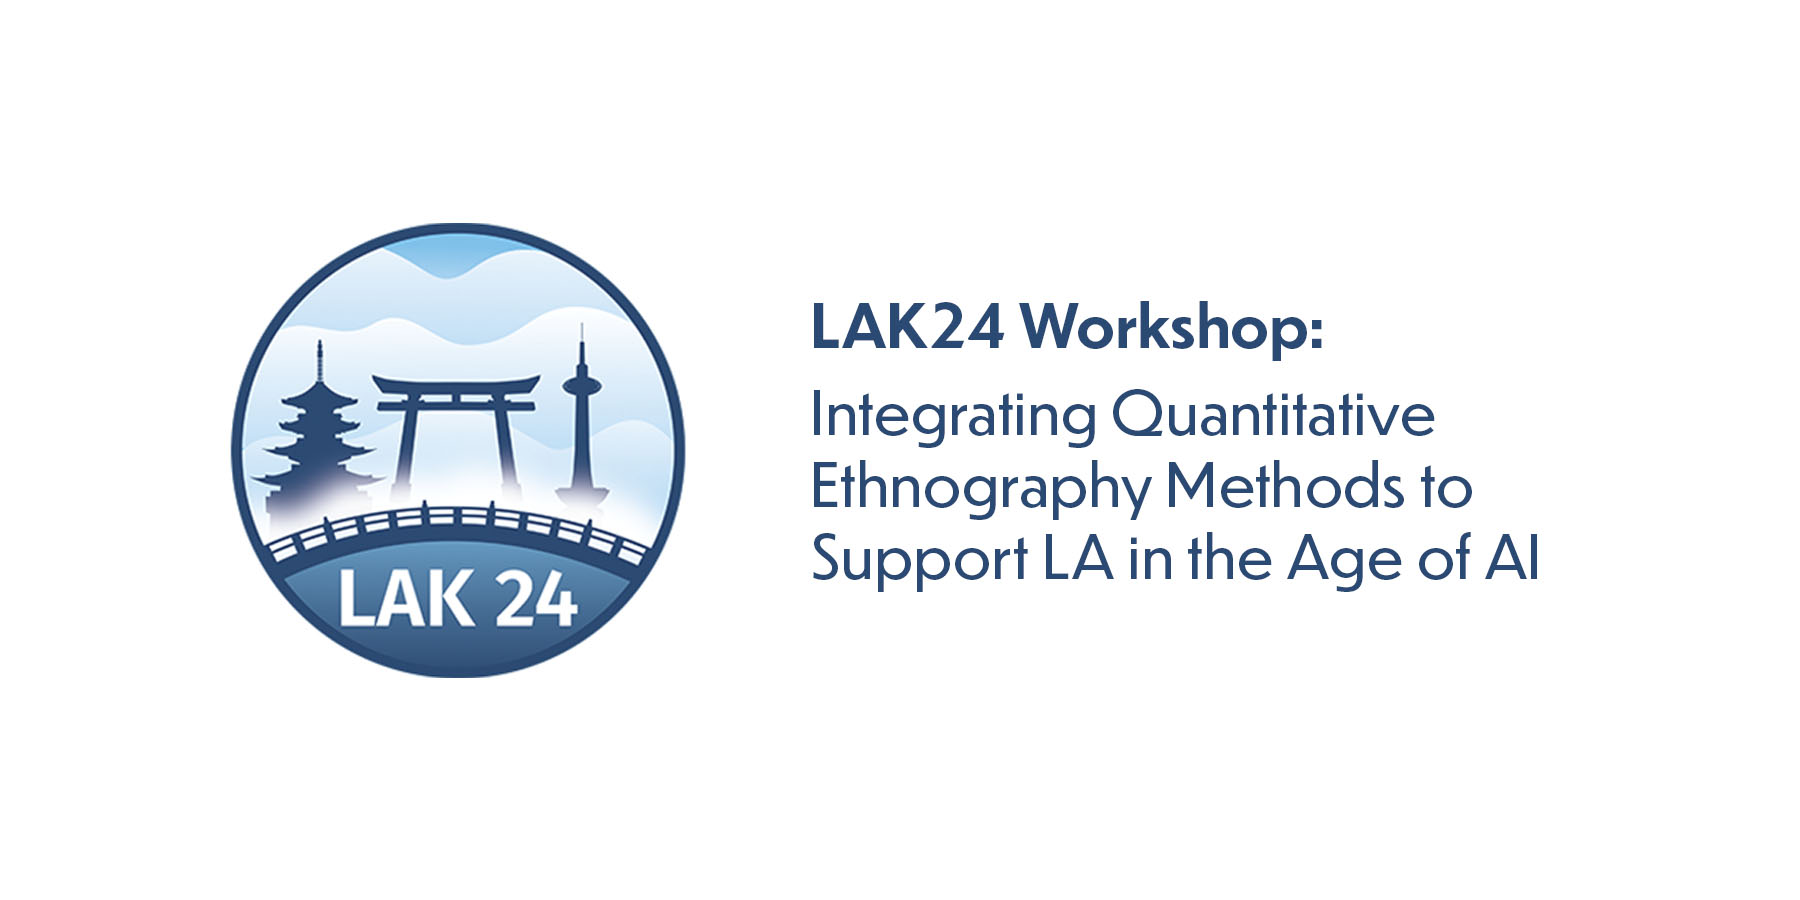 LAK24 Workshop: Integrating Quantitative Ethnography Methods to Support LA in the Age of AI